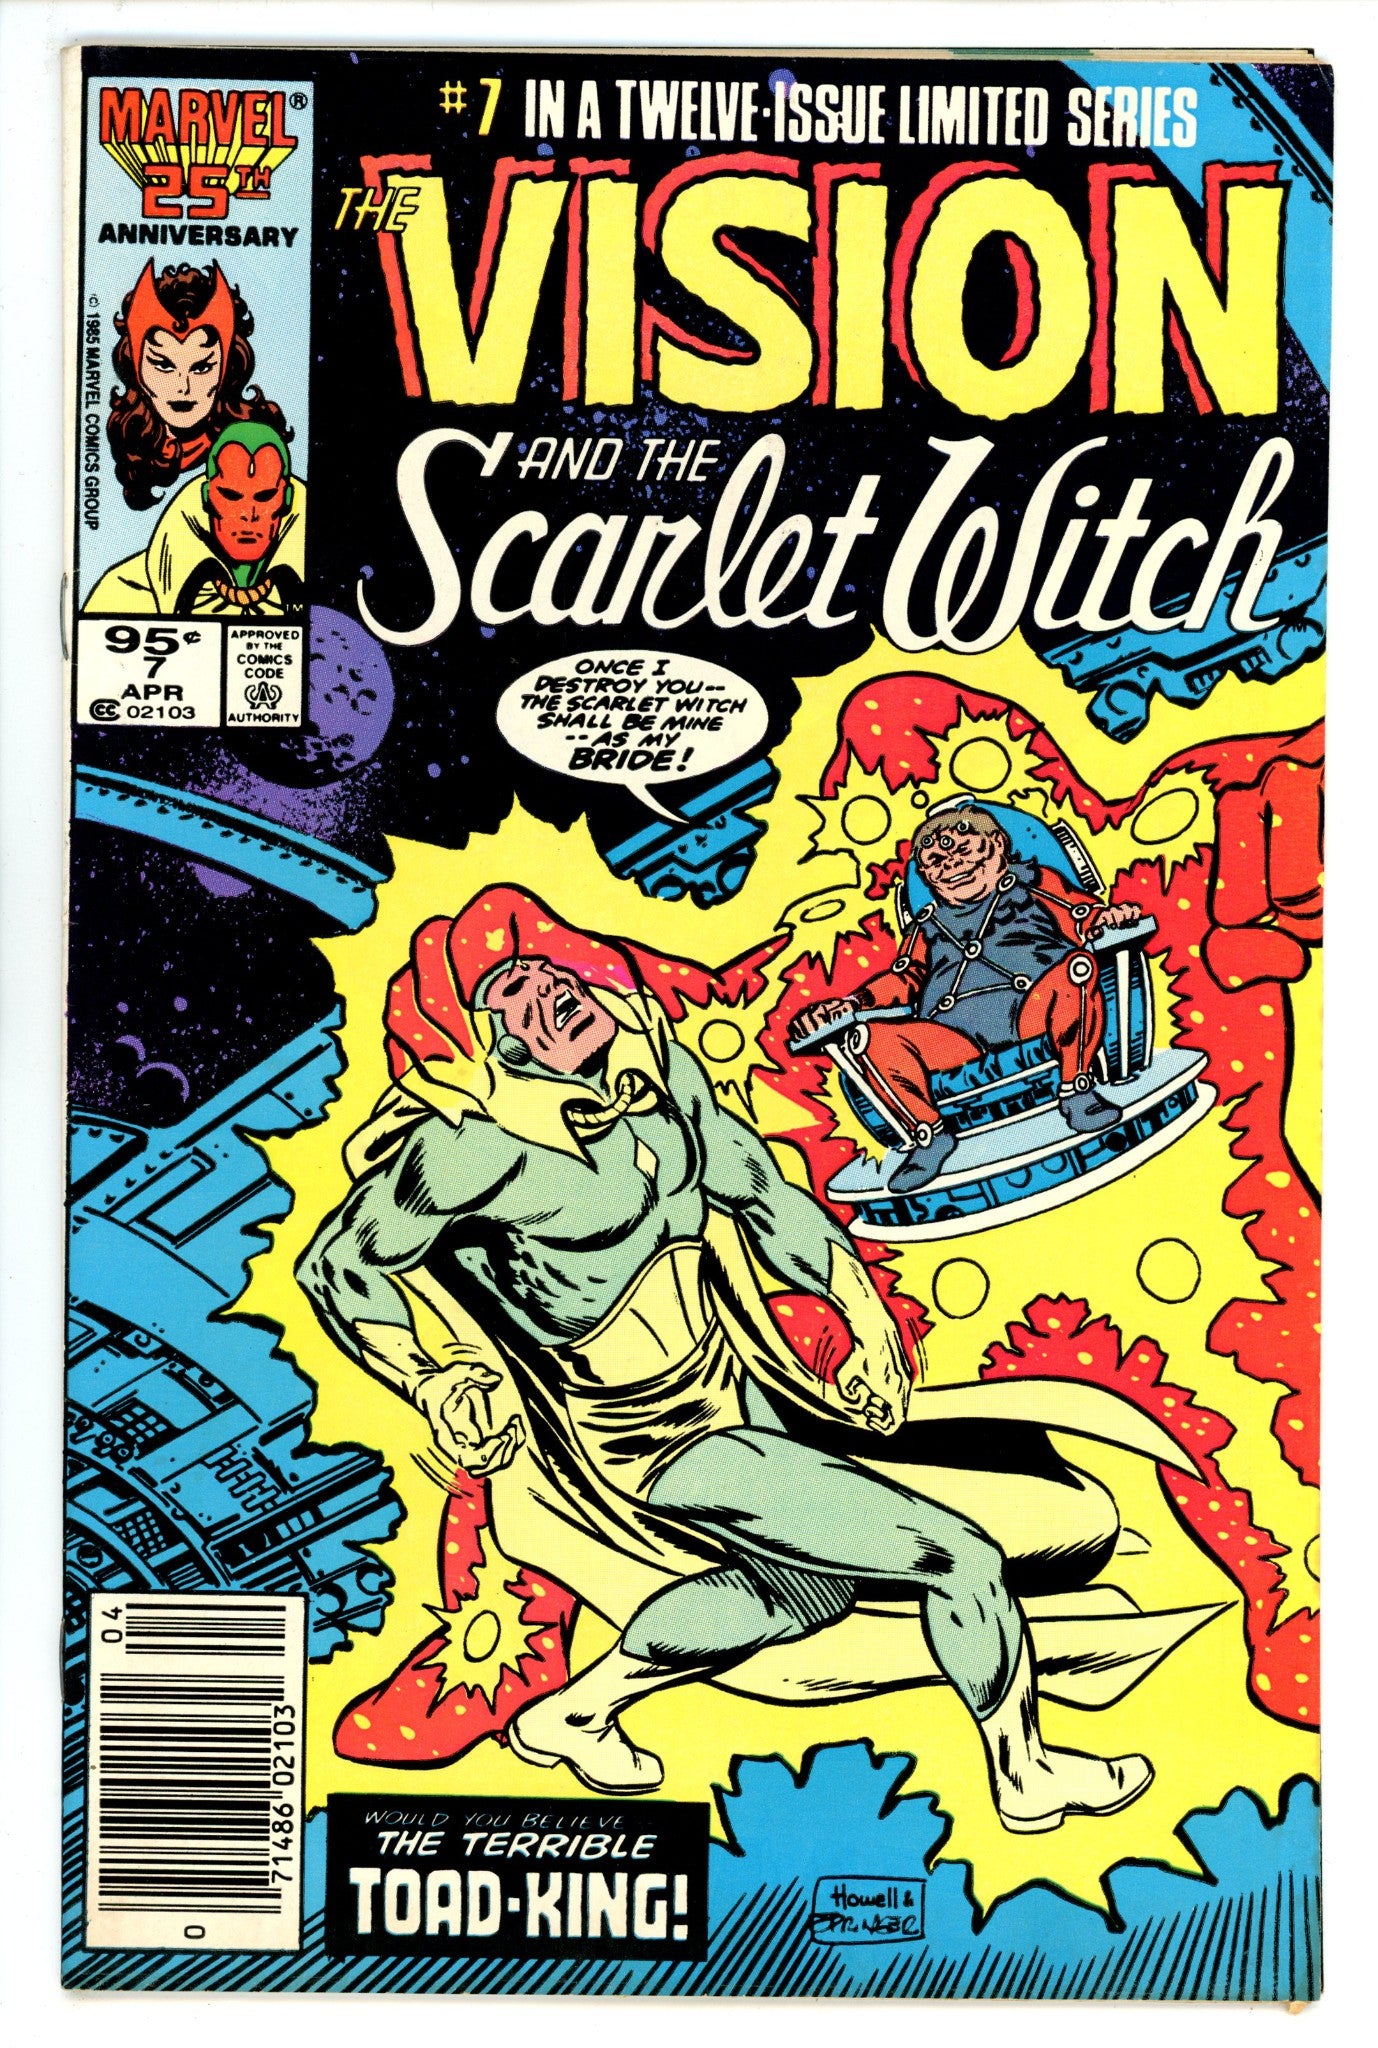 The Vision and the Scarlet Witch Vol 2 7 VG+ (4.5) (1986) Canadian Price Variant 